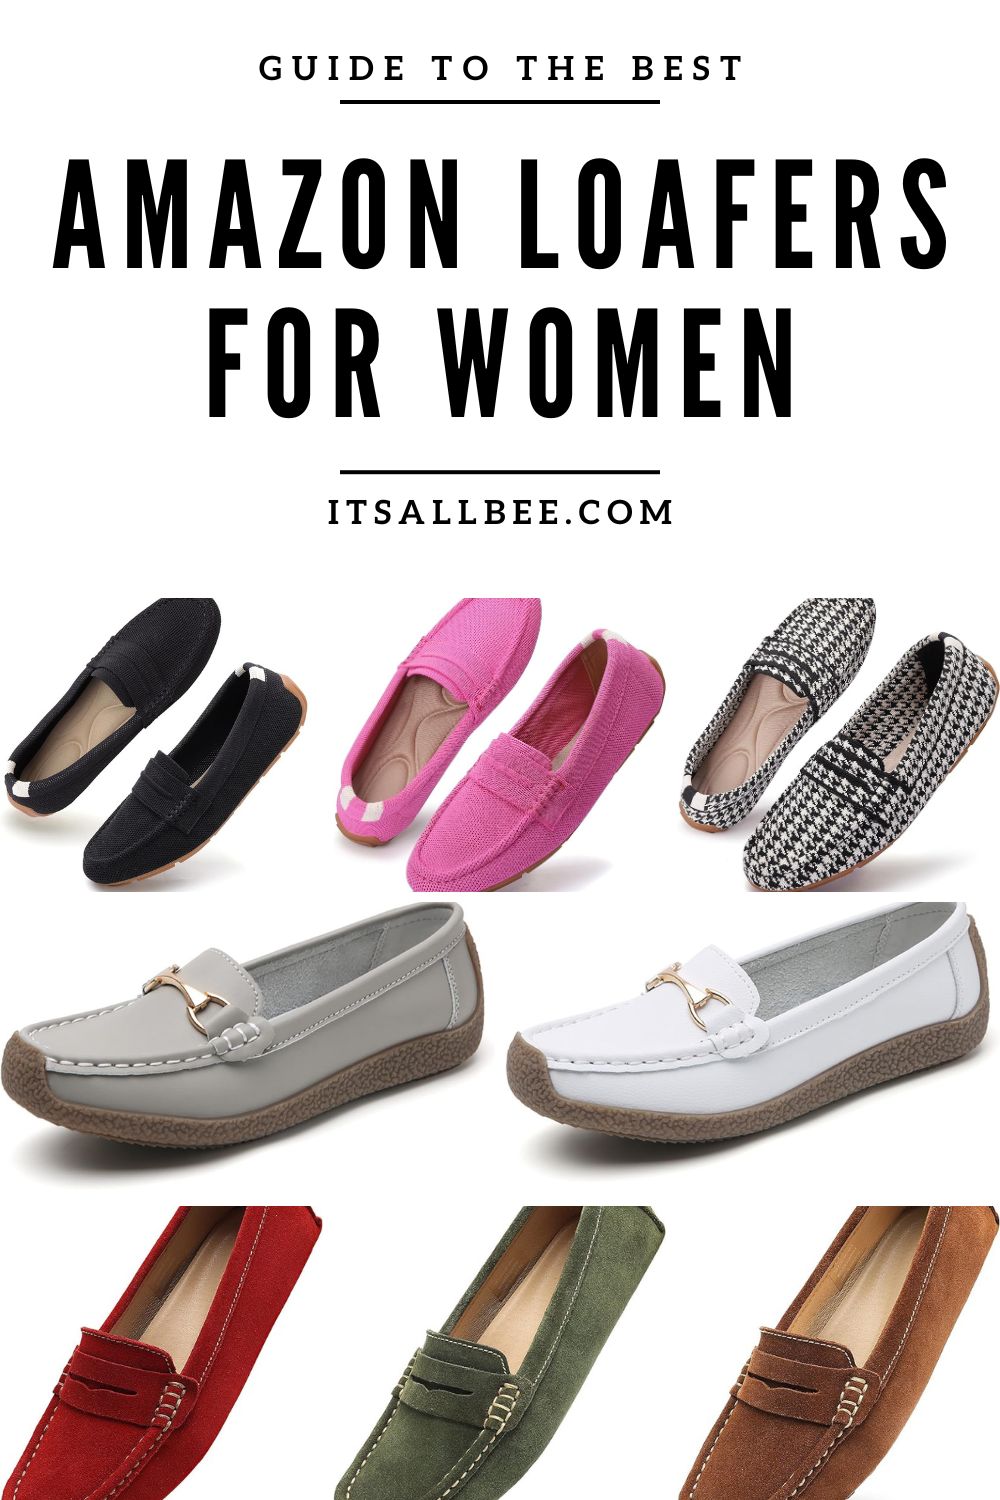 Discover the top-rated loafers on Amazon, handpicked for their style, comfort, and durability. From classic to contemporary designs, find the perfect pair for any occasion at unbeatable prices. Explore our expert selections, backed by customer reviews, to elevate your footwear collection today. | Womens Leather Loafers Flats | Loafers Outfit Womens Aesthetic | | Womens Loafers Outfit Summer | Best Loafers For Travel | Best Loafers For Women | Best Loafers For Walking | | Best Loafers For Work